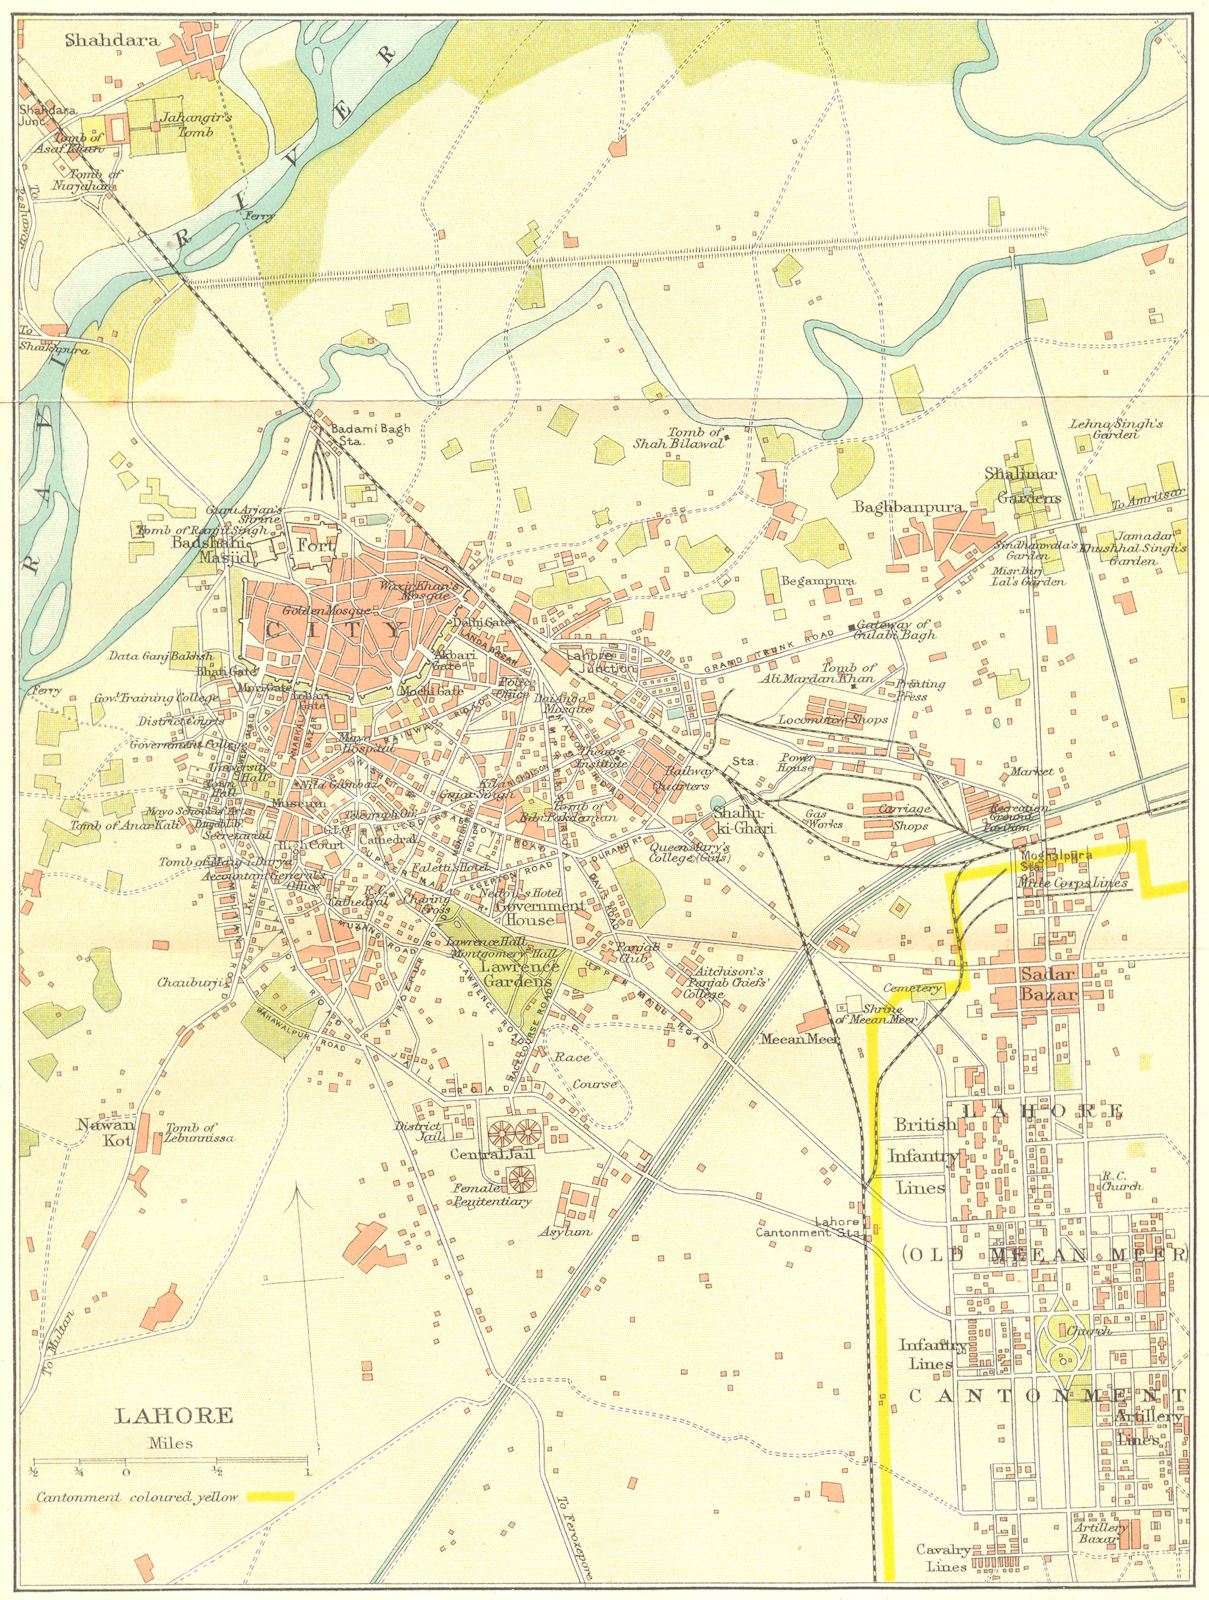 PAKISTAN. Lahore city plan showing the Old Meean Meer Cantonment 1924 map